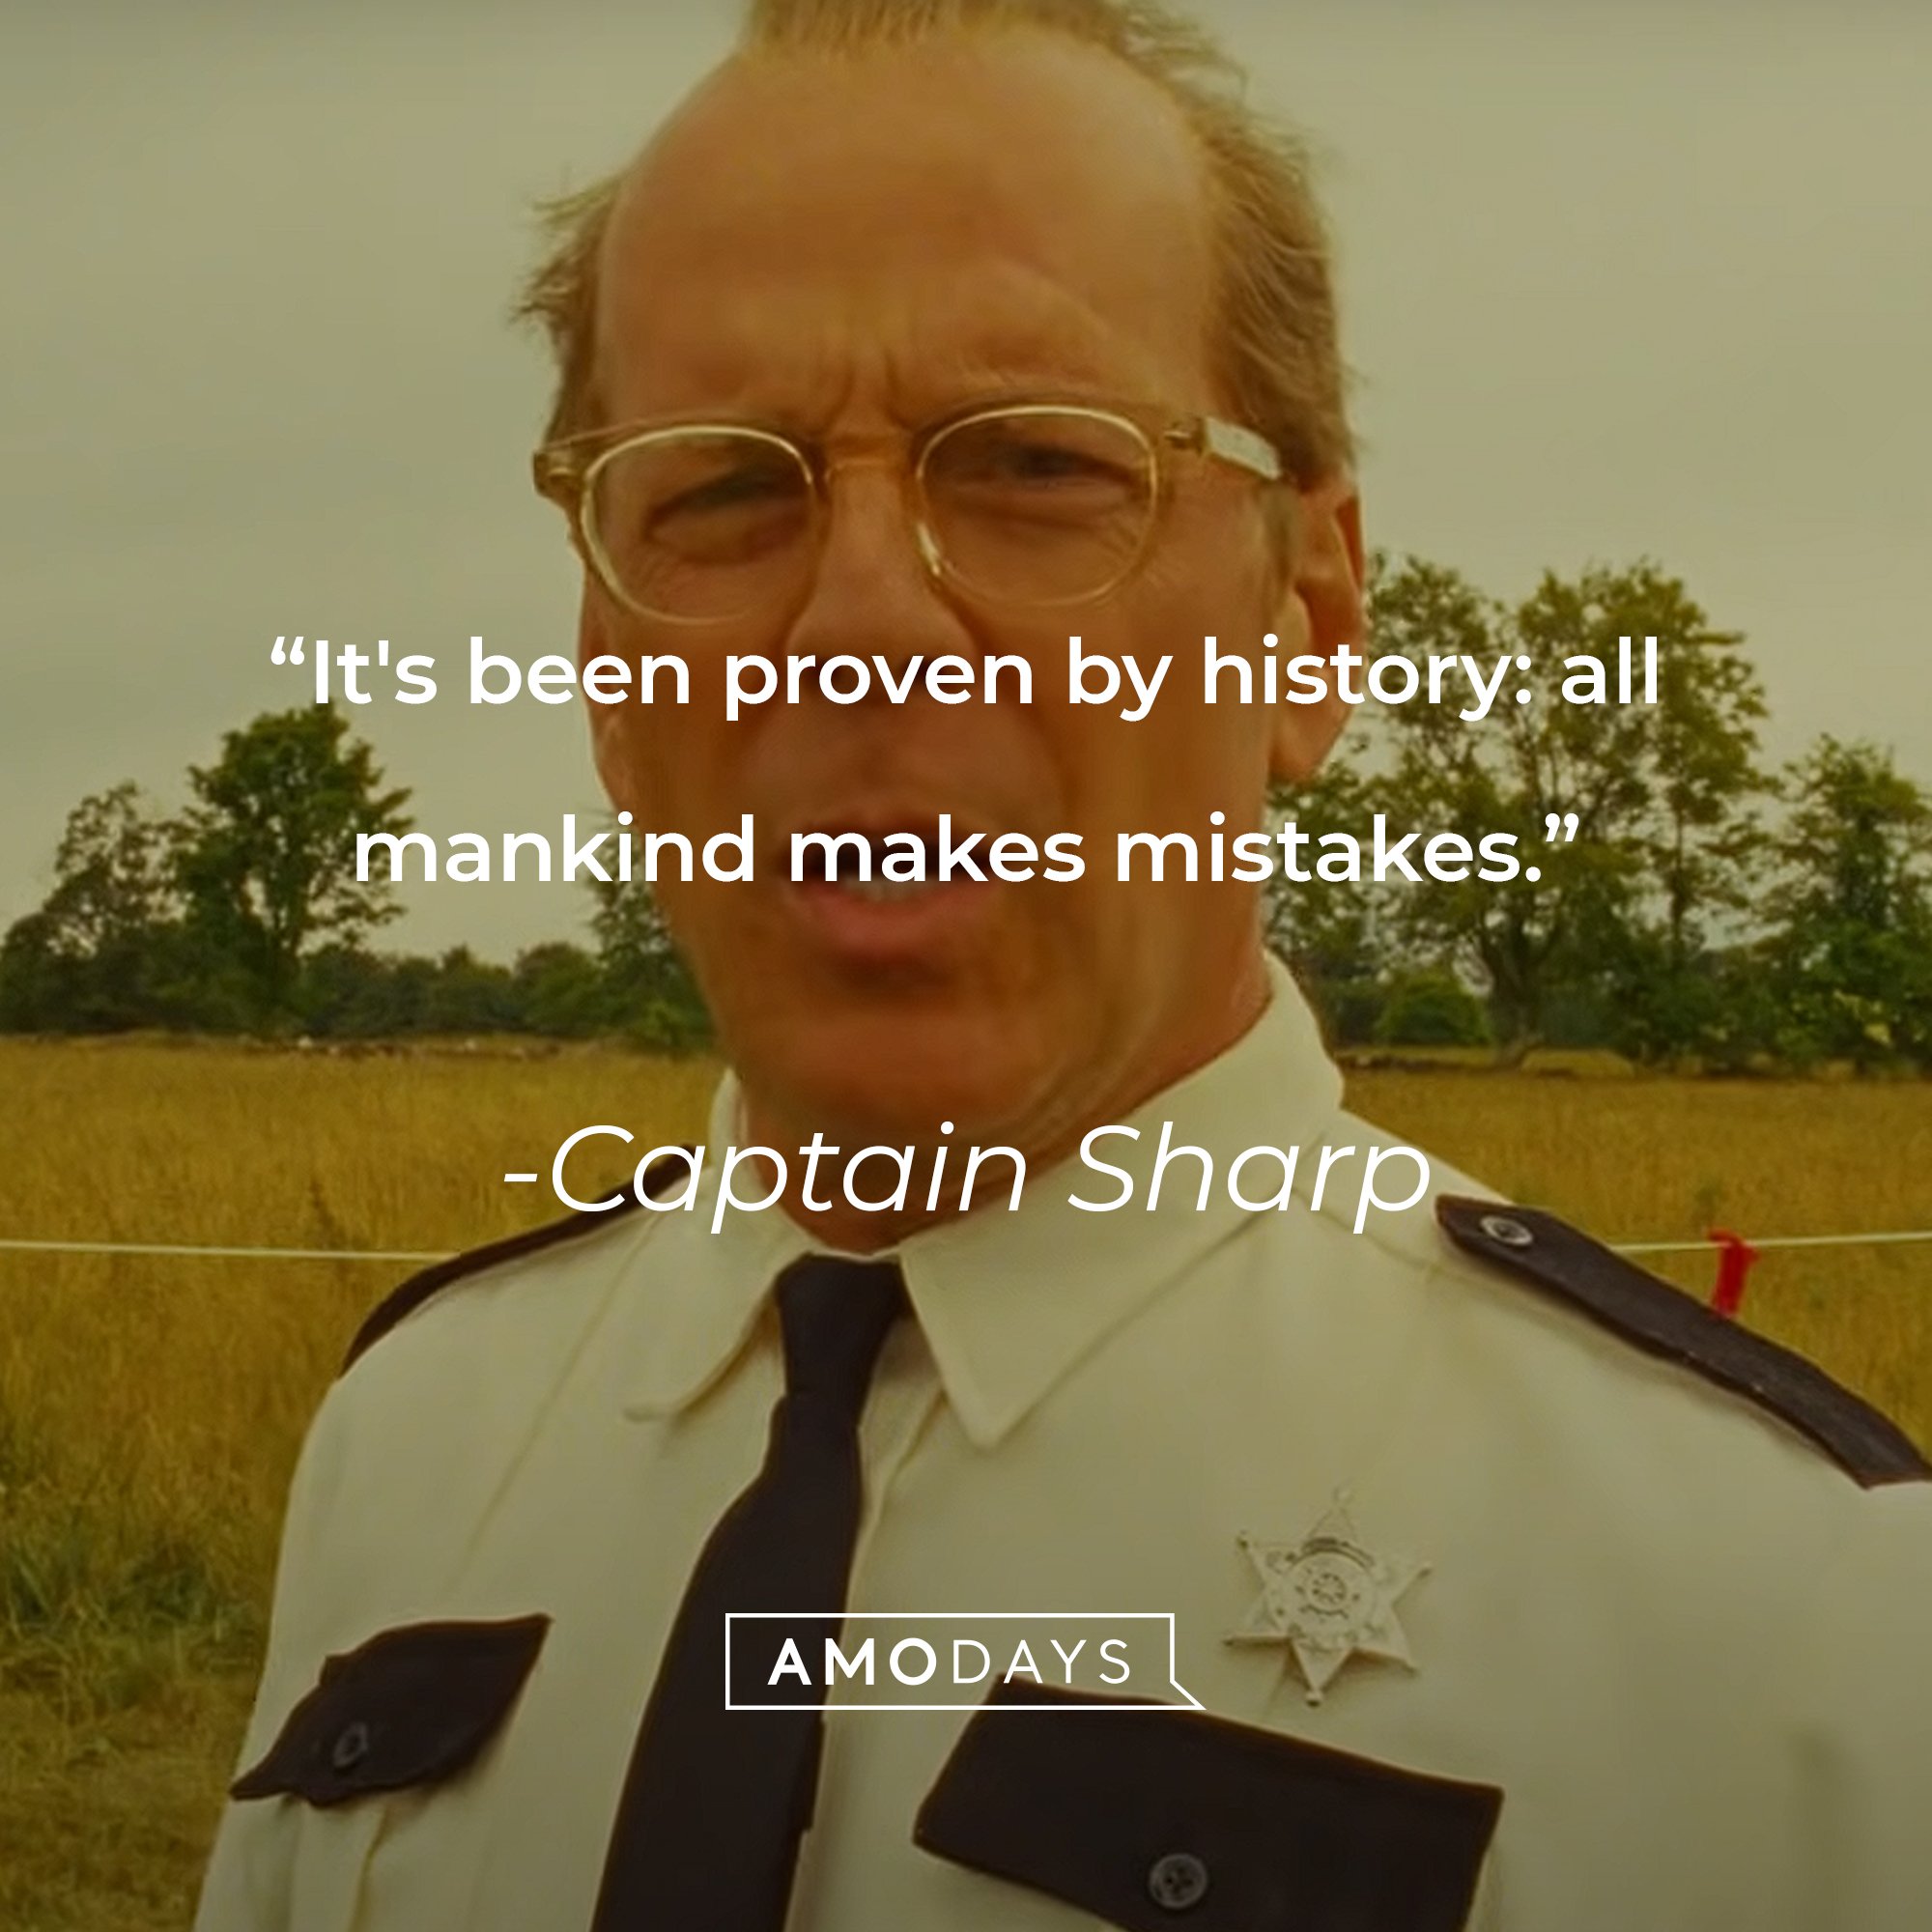 Captain Sharp's quote: "It's been proven by history: all mankind makes mistakes." | Image: AmoDays